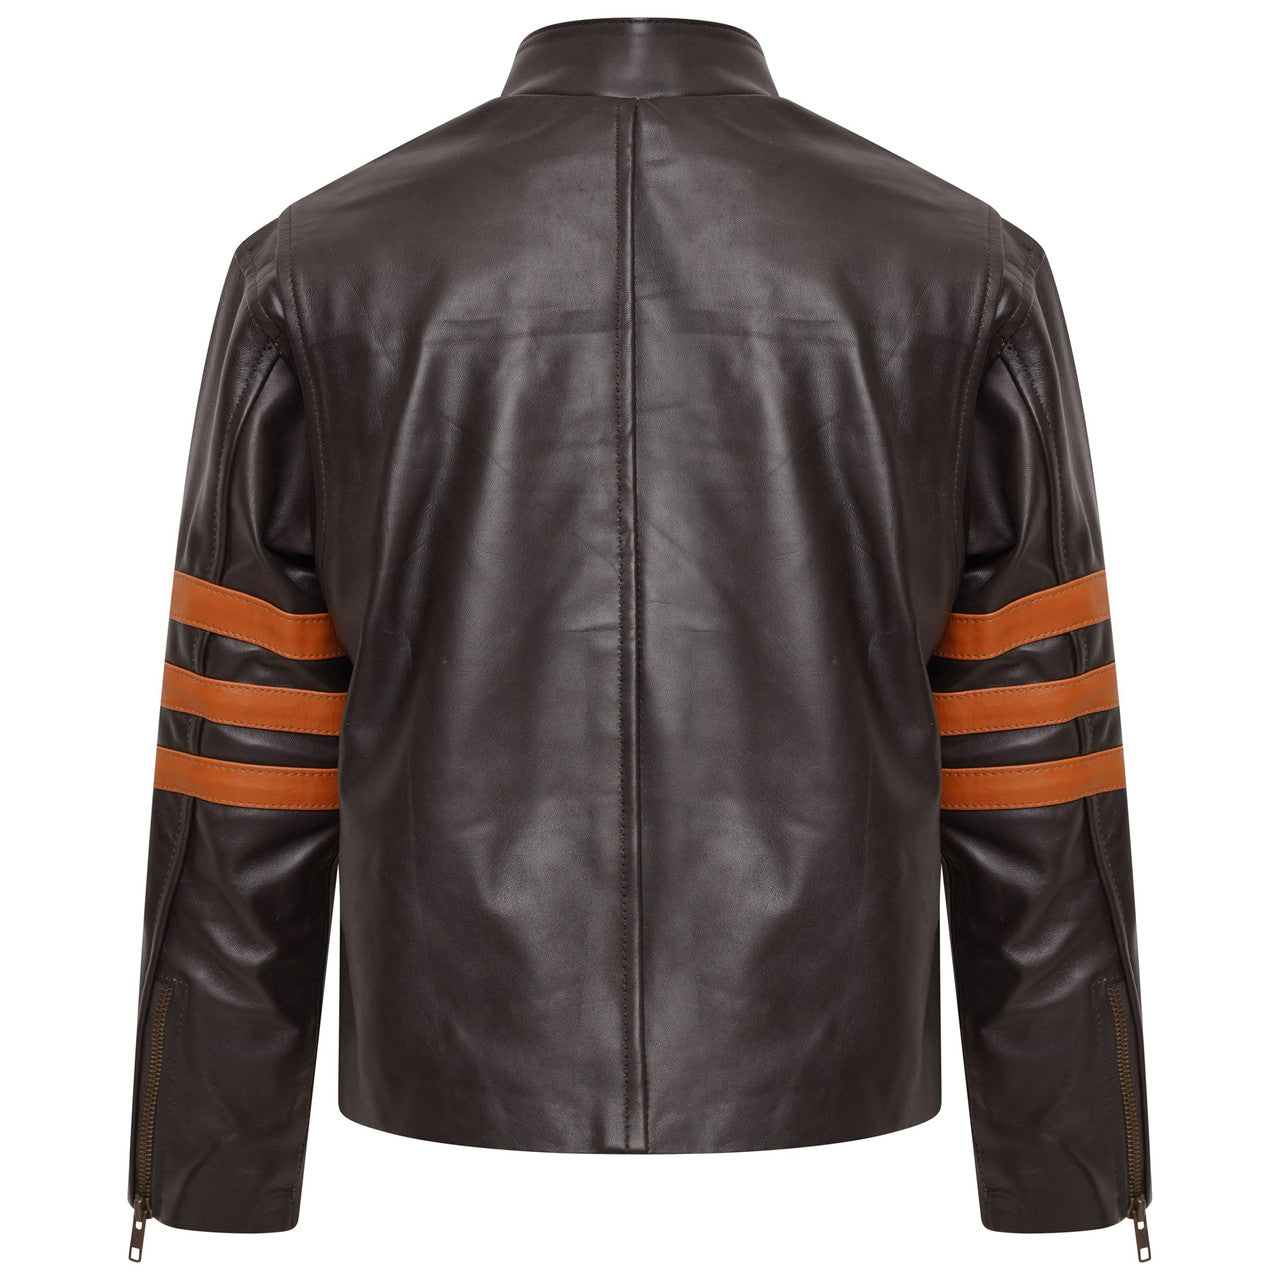 Boys Leather Jacket Brown Inspired By X-Men Wolverine